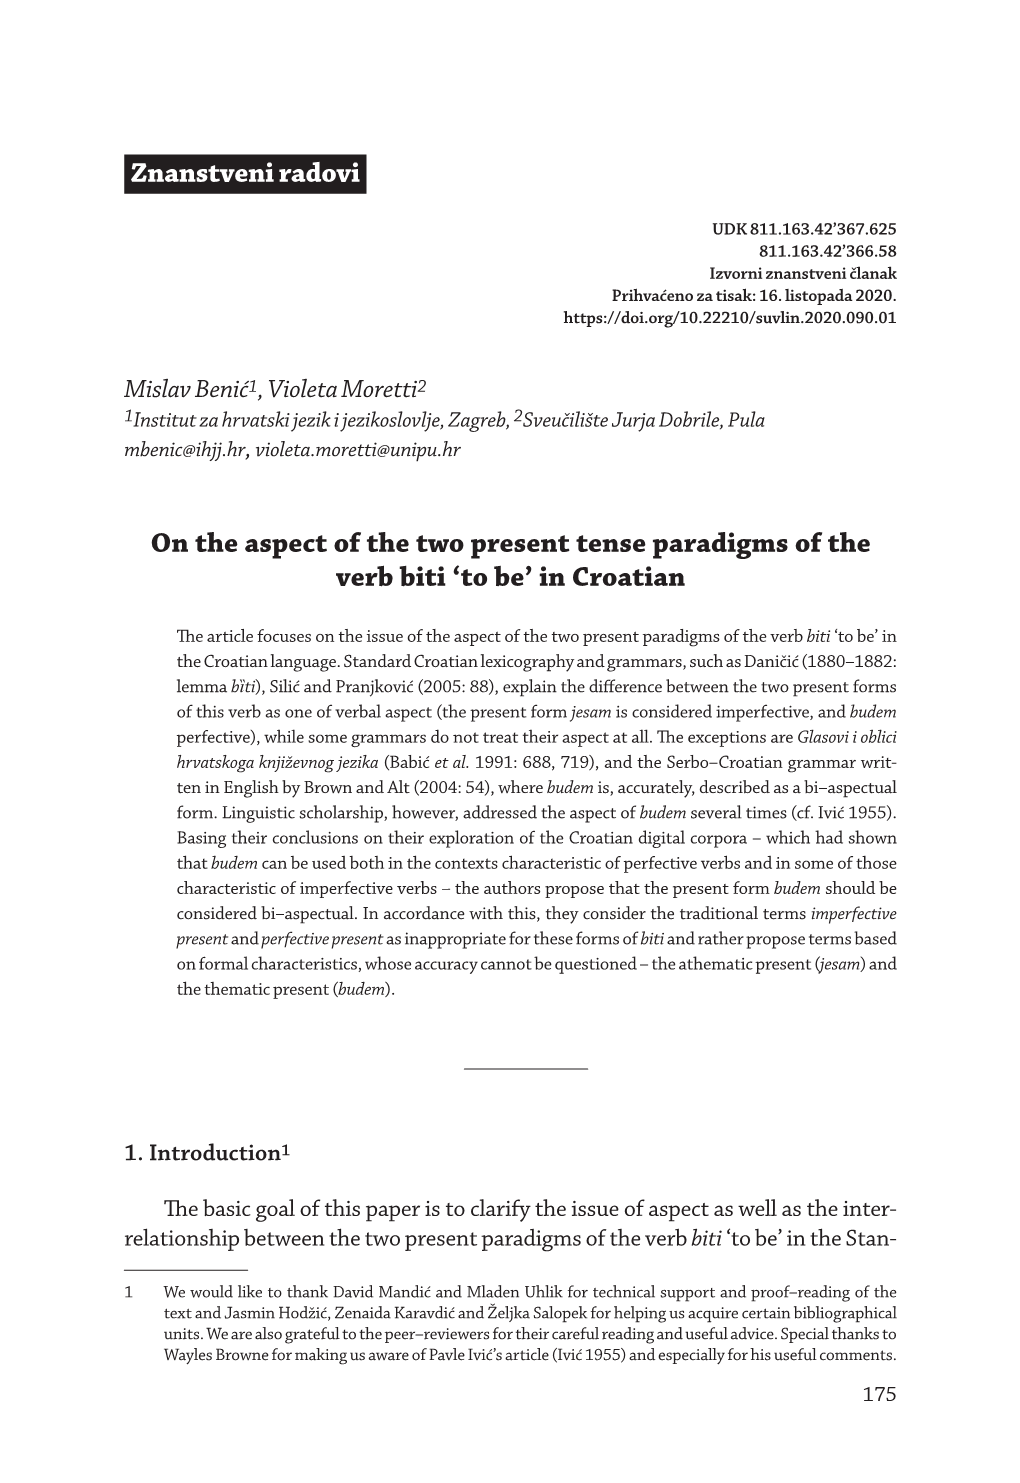 On the Aspect of the Two Present Tense Paradigms of the Verb Biti 'To Be' in Croatian Znanstveni Radovi